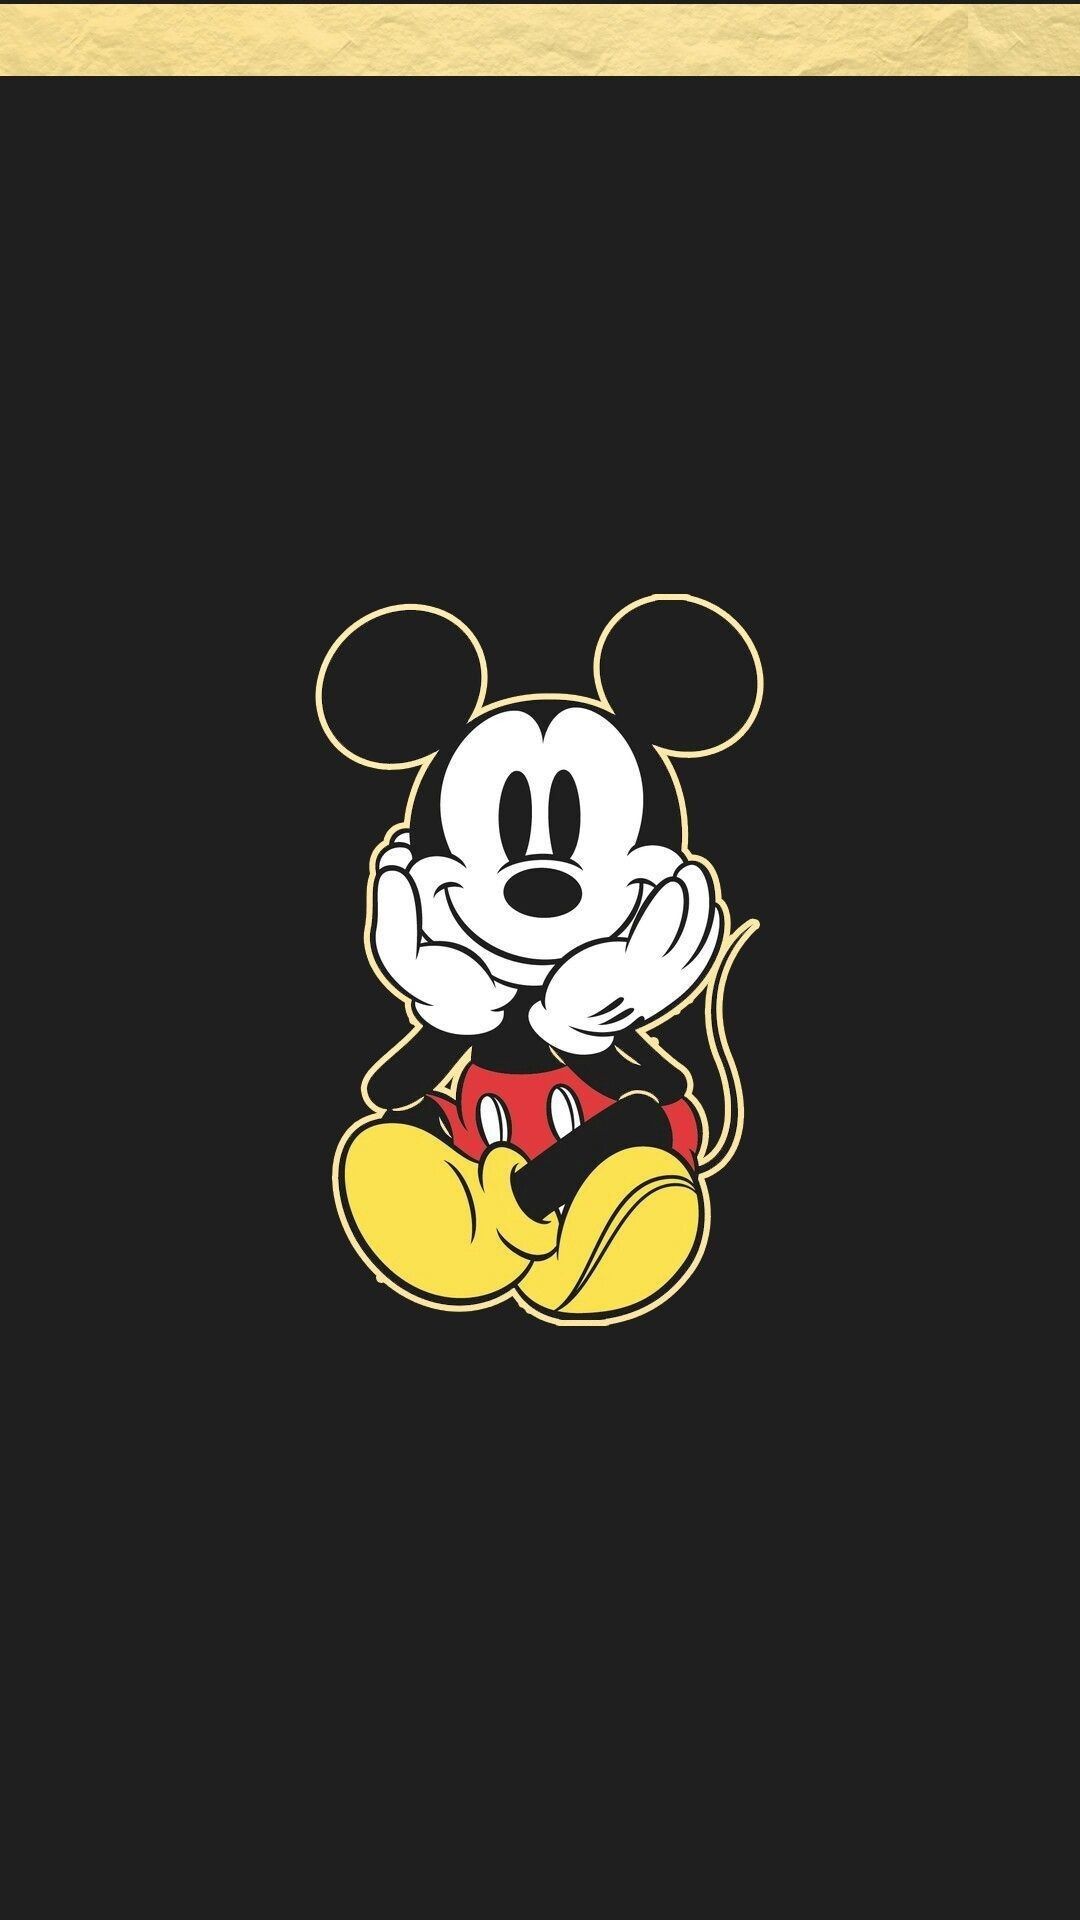 Mickey Mouse Aesthetic Wallpapers Wallpaper Cave We are the mickey mouse pfp army. mickey mouse aesthetic wallpapers